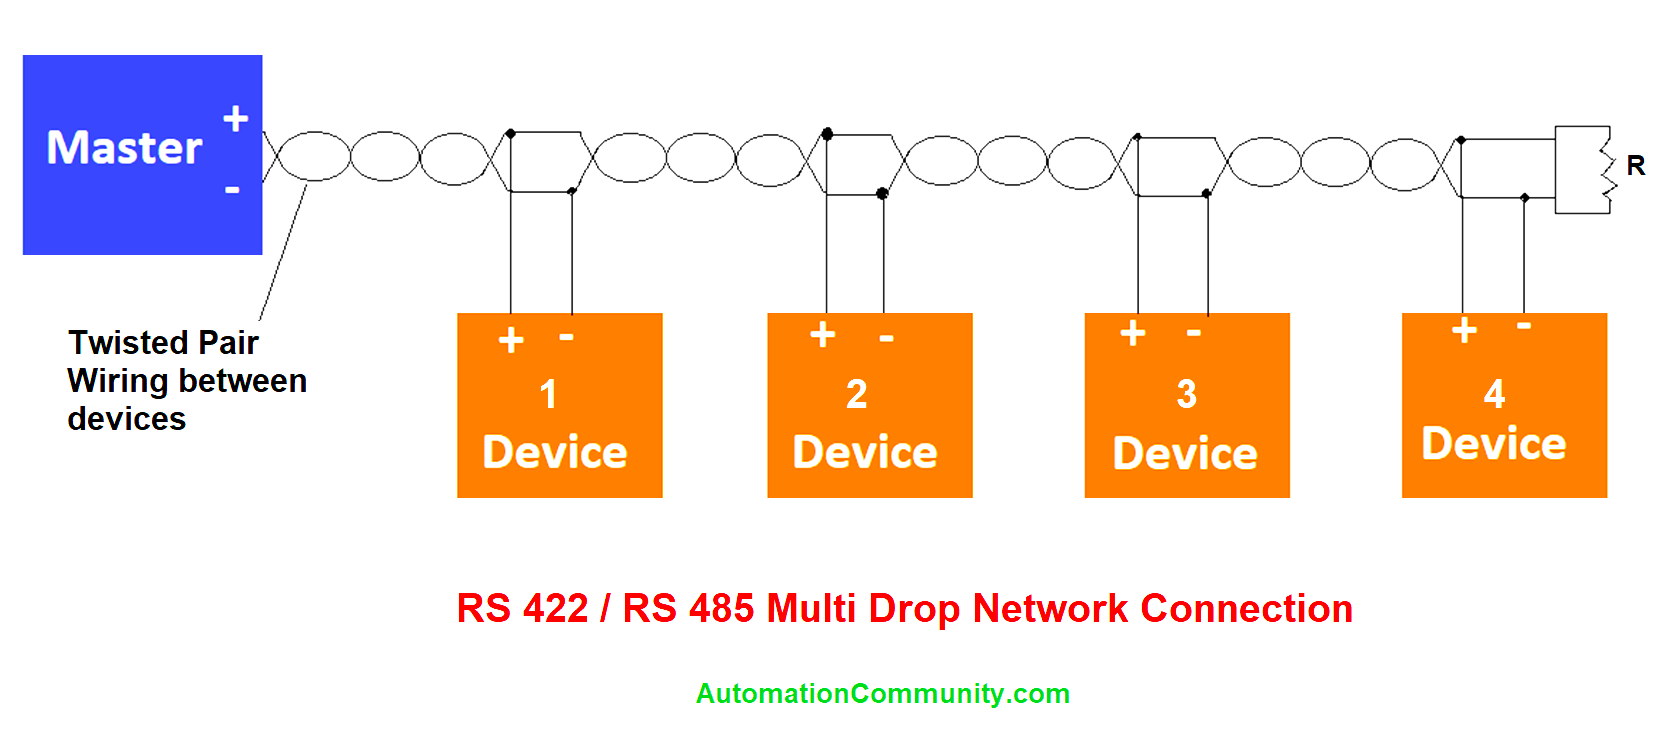 RS 485 Multi-Drop Network Connections